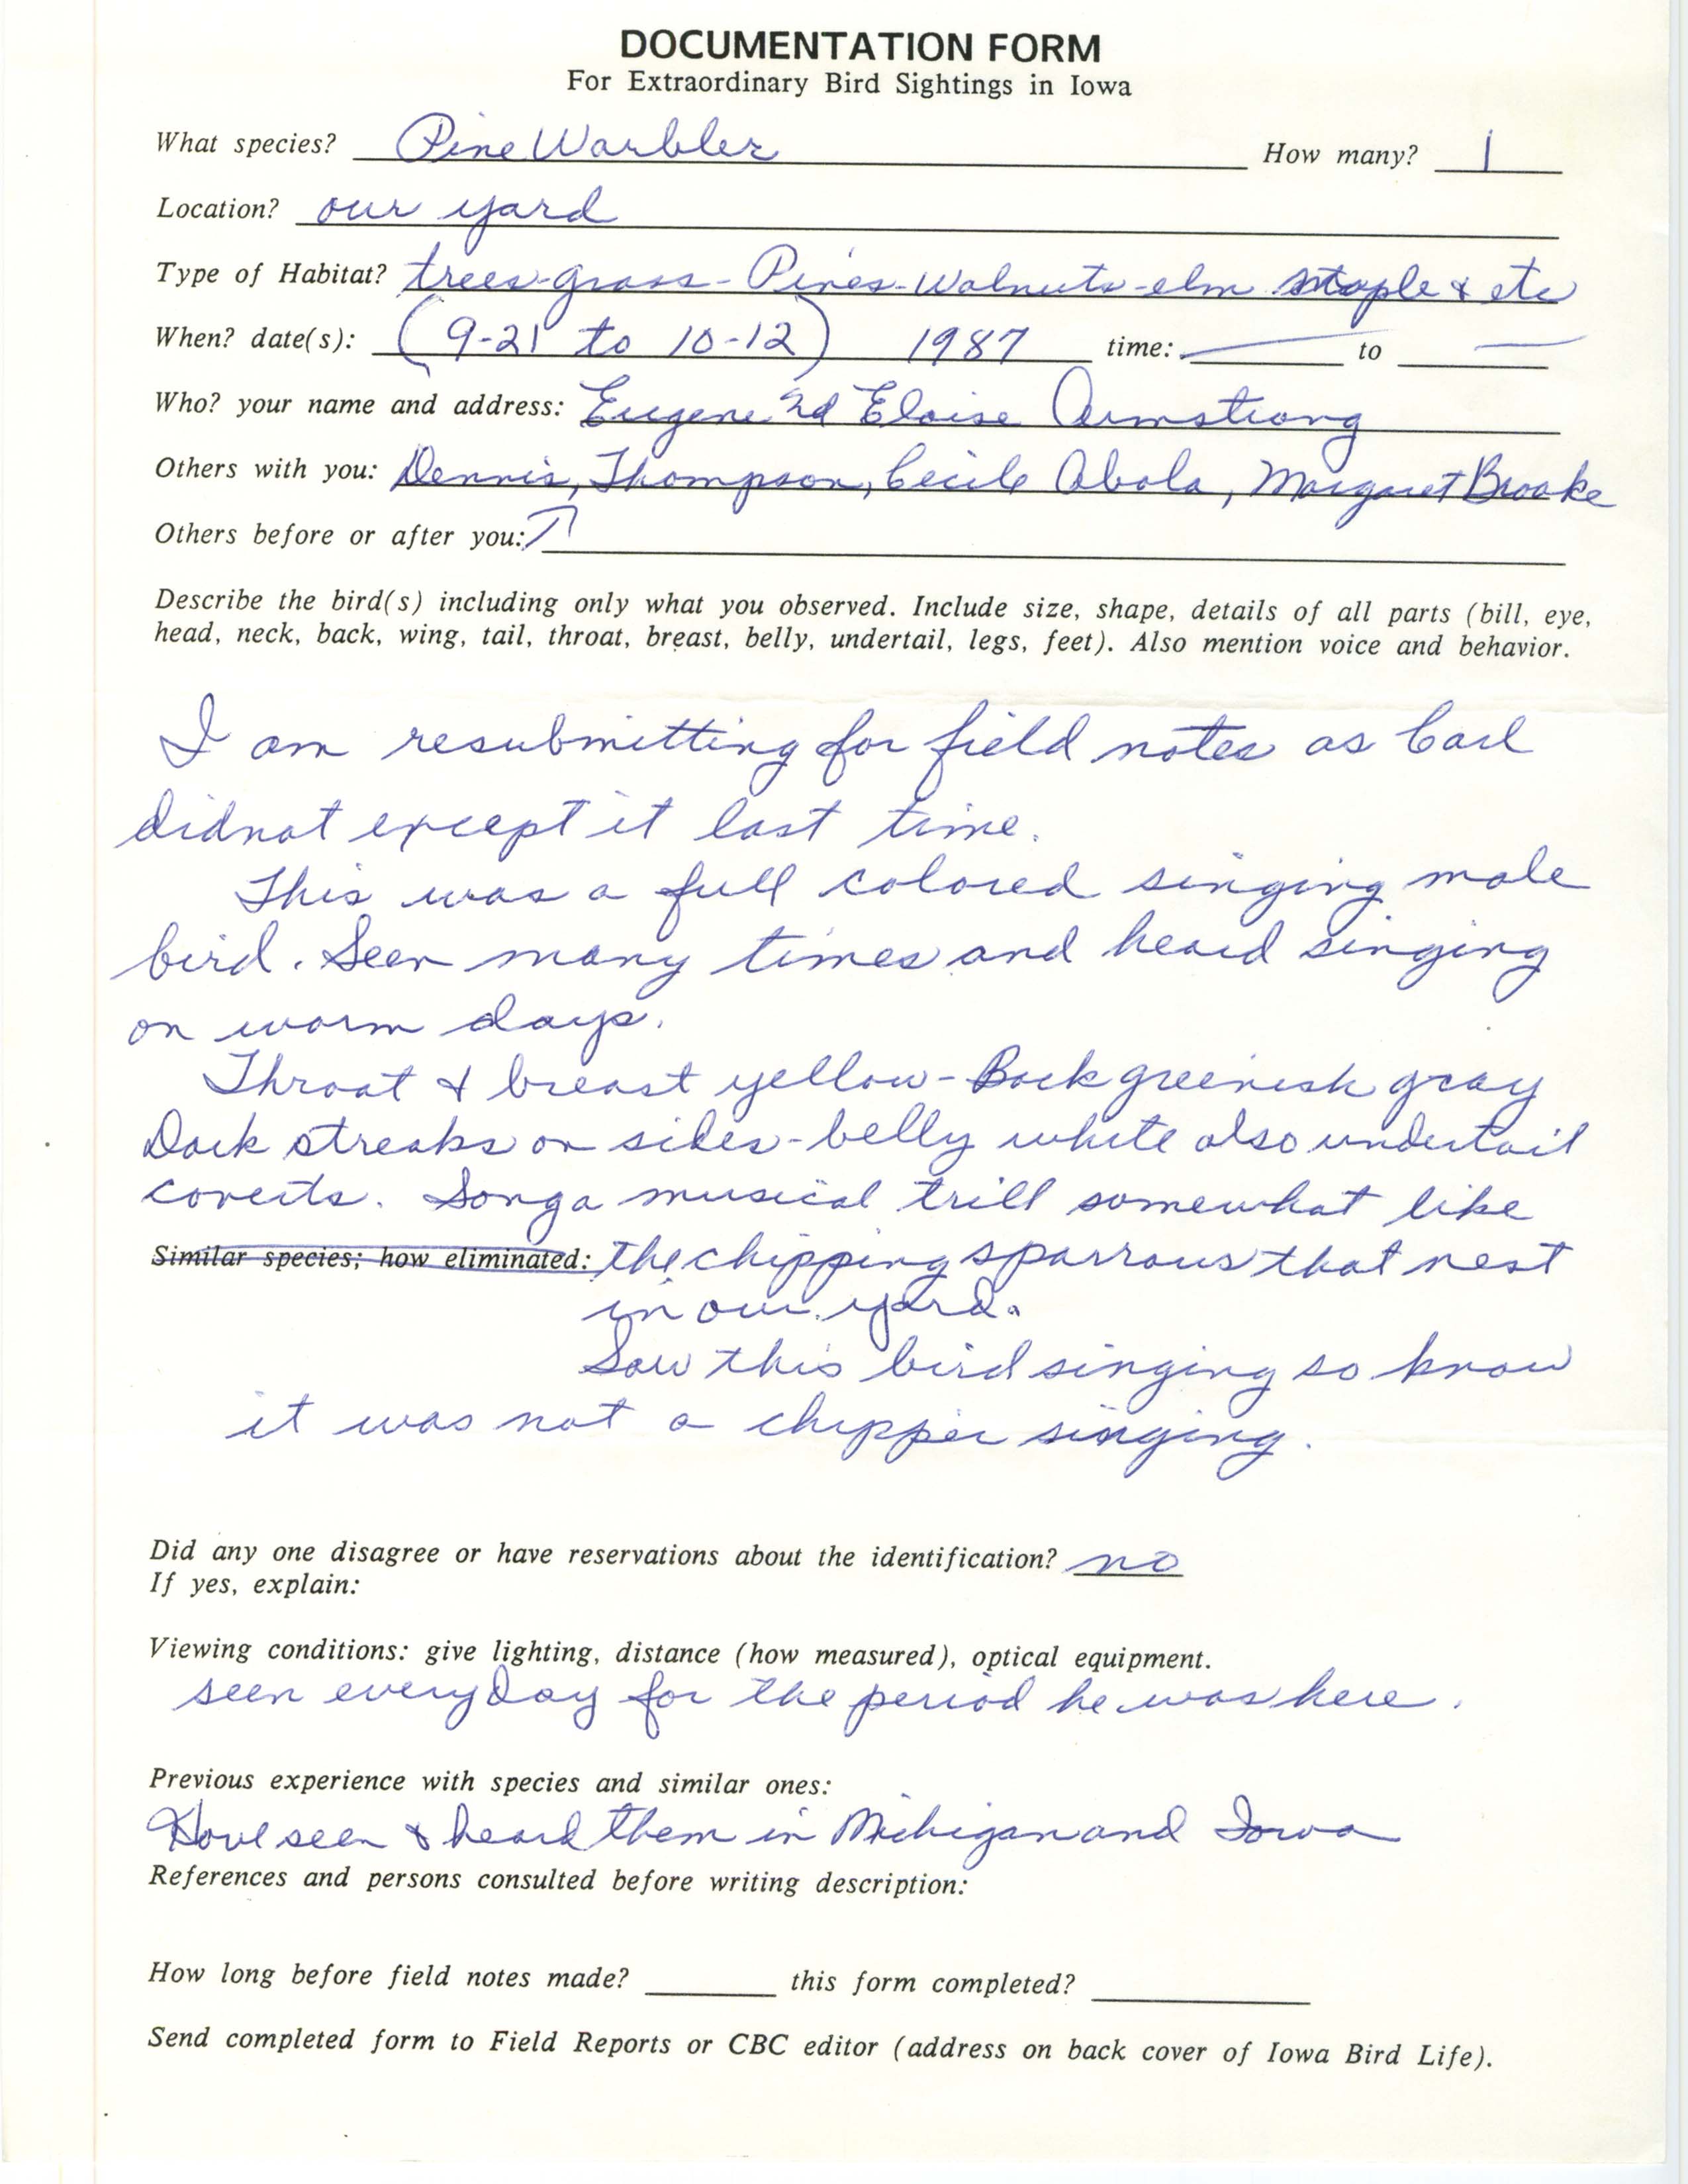 Rare bird documentation form for Pine Warbler at Booneville in 1987